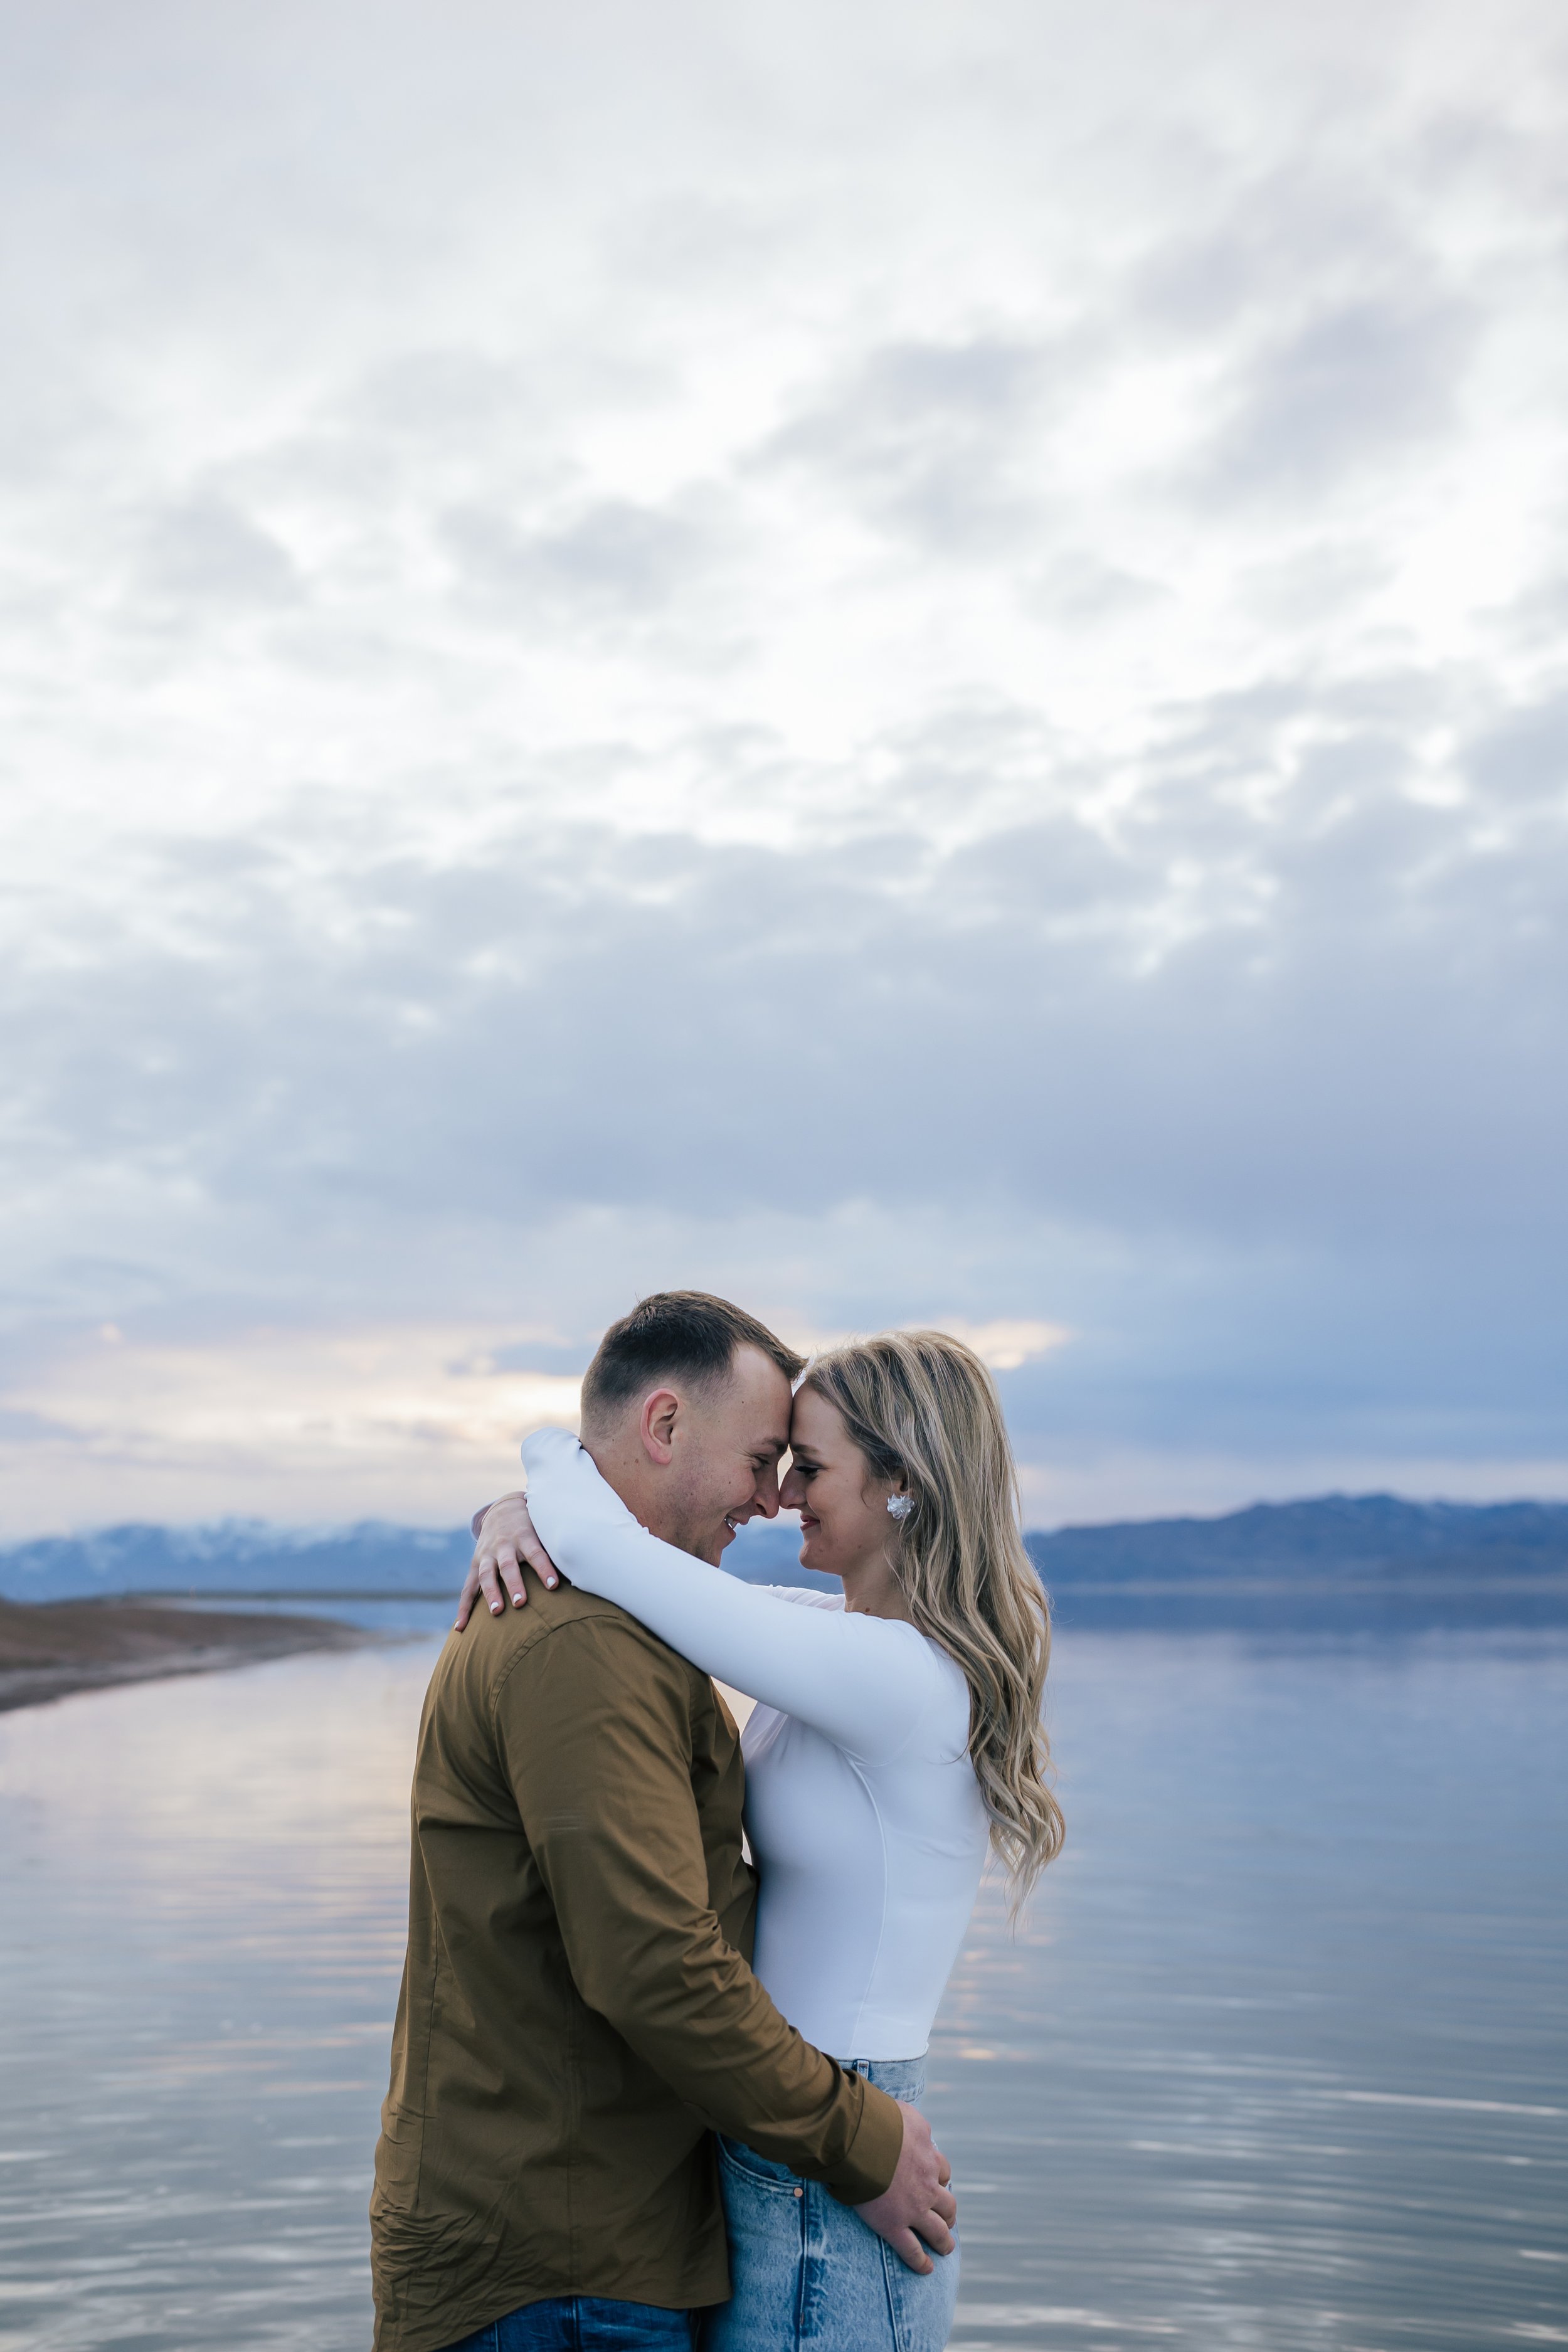  At dusk at the Bonneville Salt Flats, a couple embraces while standing in the water taken by Emily Jenkins photography. dusk engagements couple style ideas engagement casual outfits #EmilyJenkinsPhotography #EmilyJenkinsEngagements #BonnevilleSaltFl